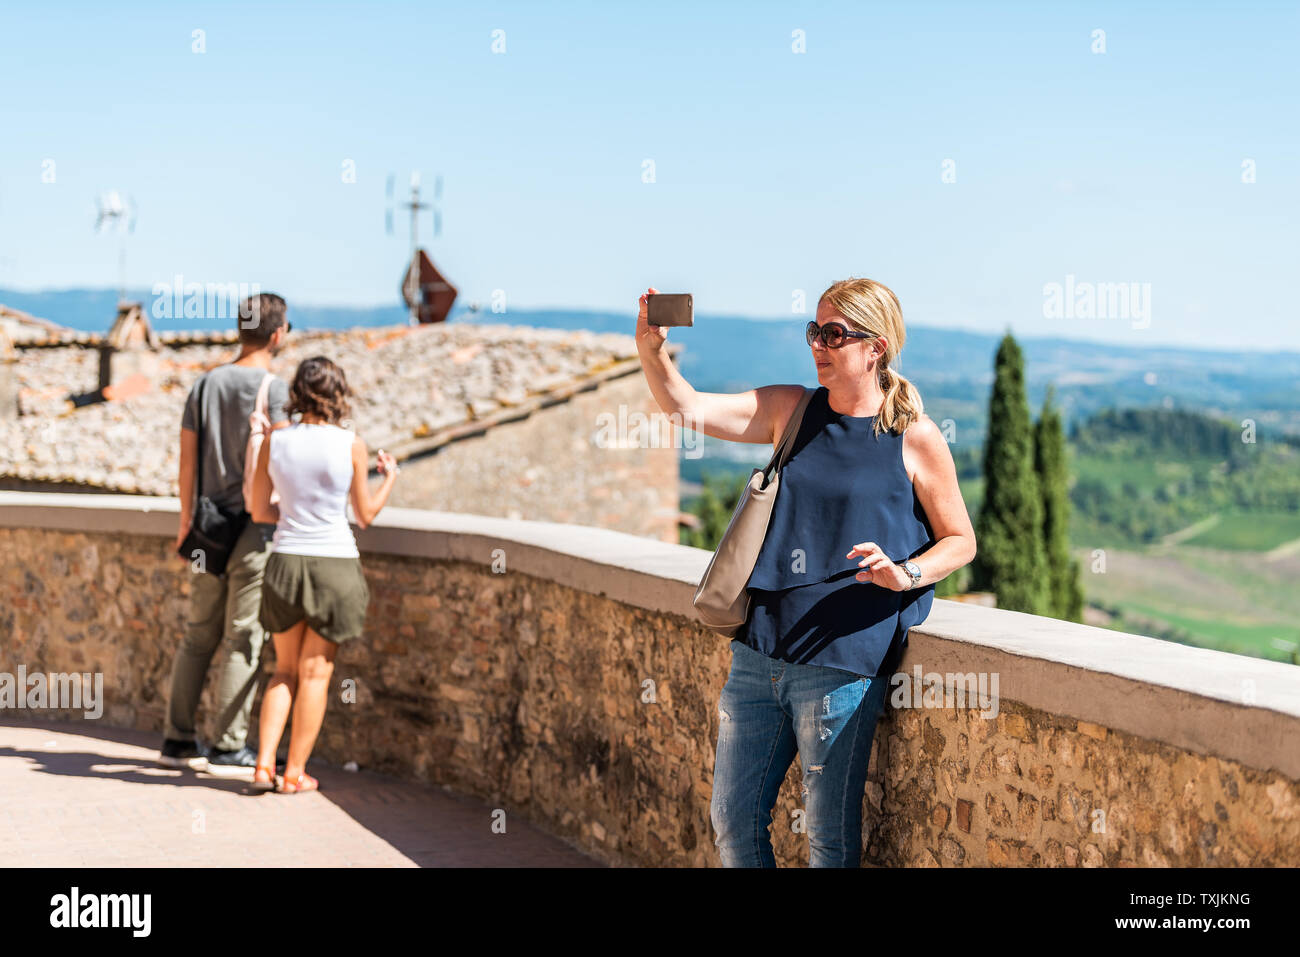 San Gimignano, Italy - August 27, 2018: People woman taking selfie picture exploring small historic medieval town village in Tuscany with view of roll Stock Photo